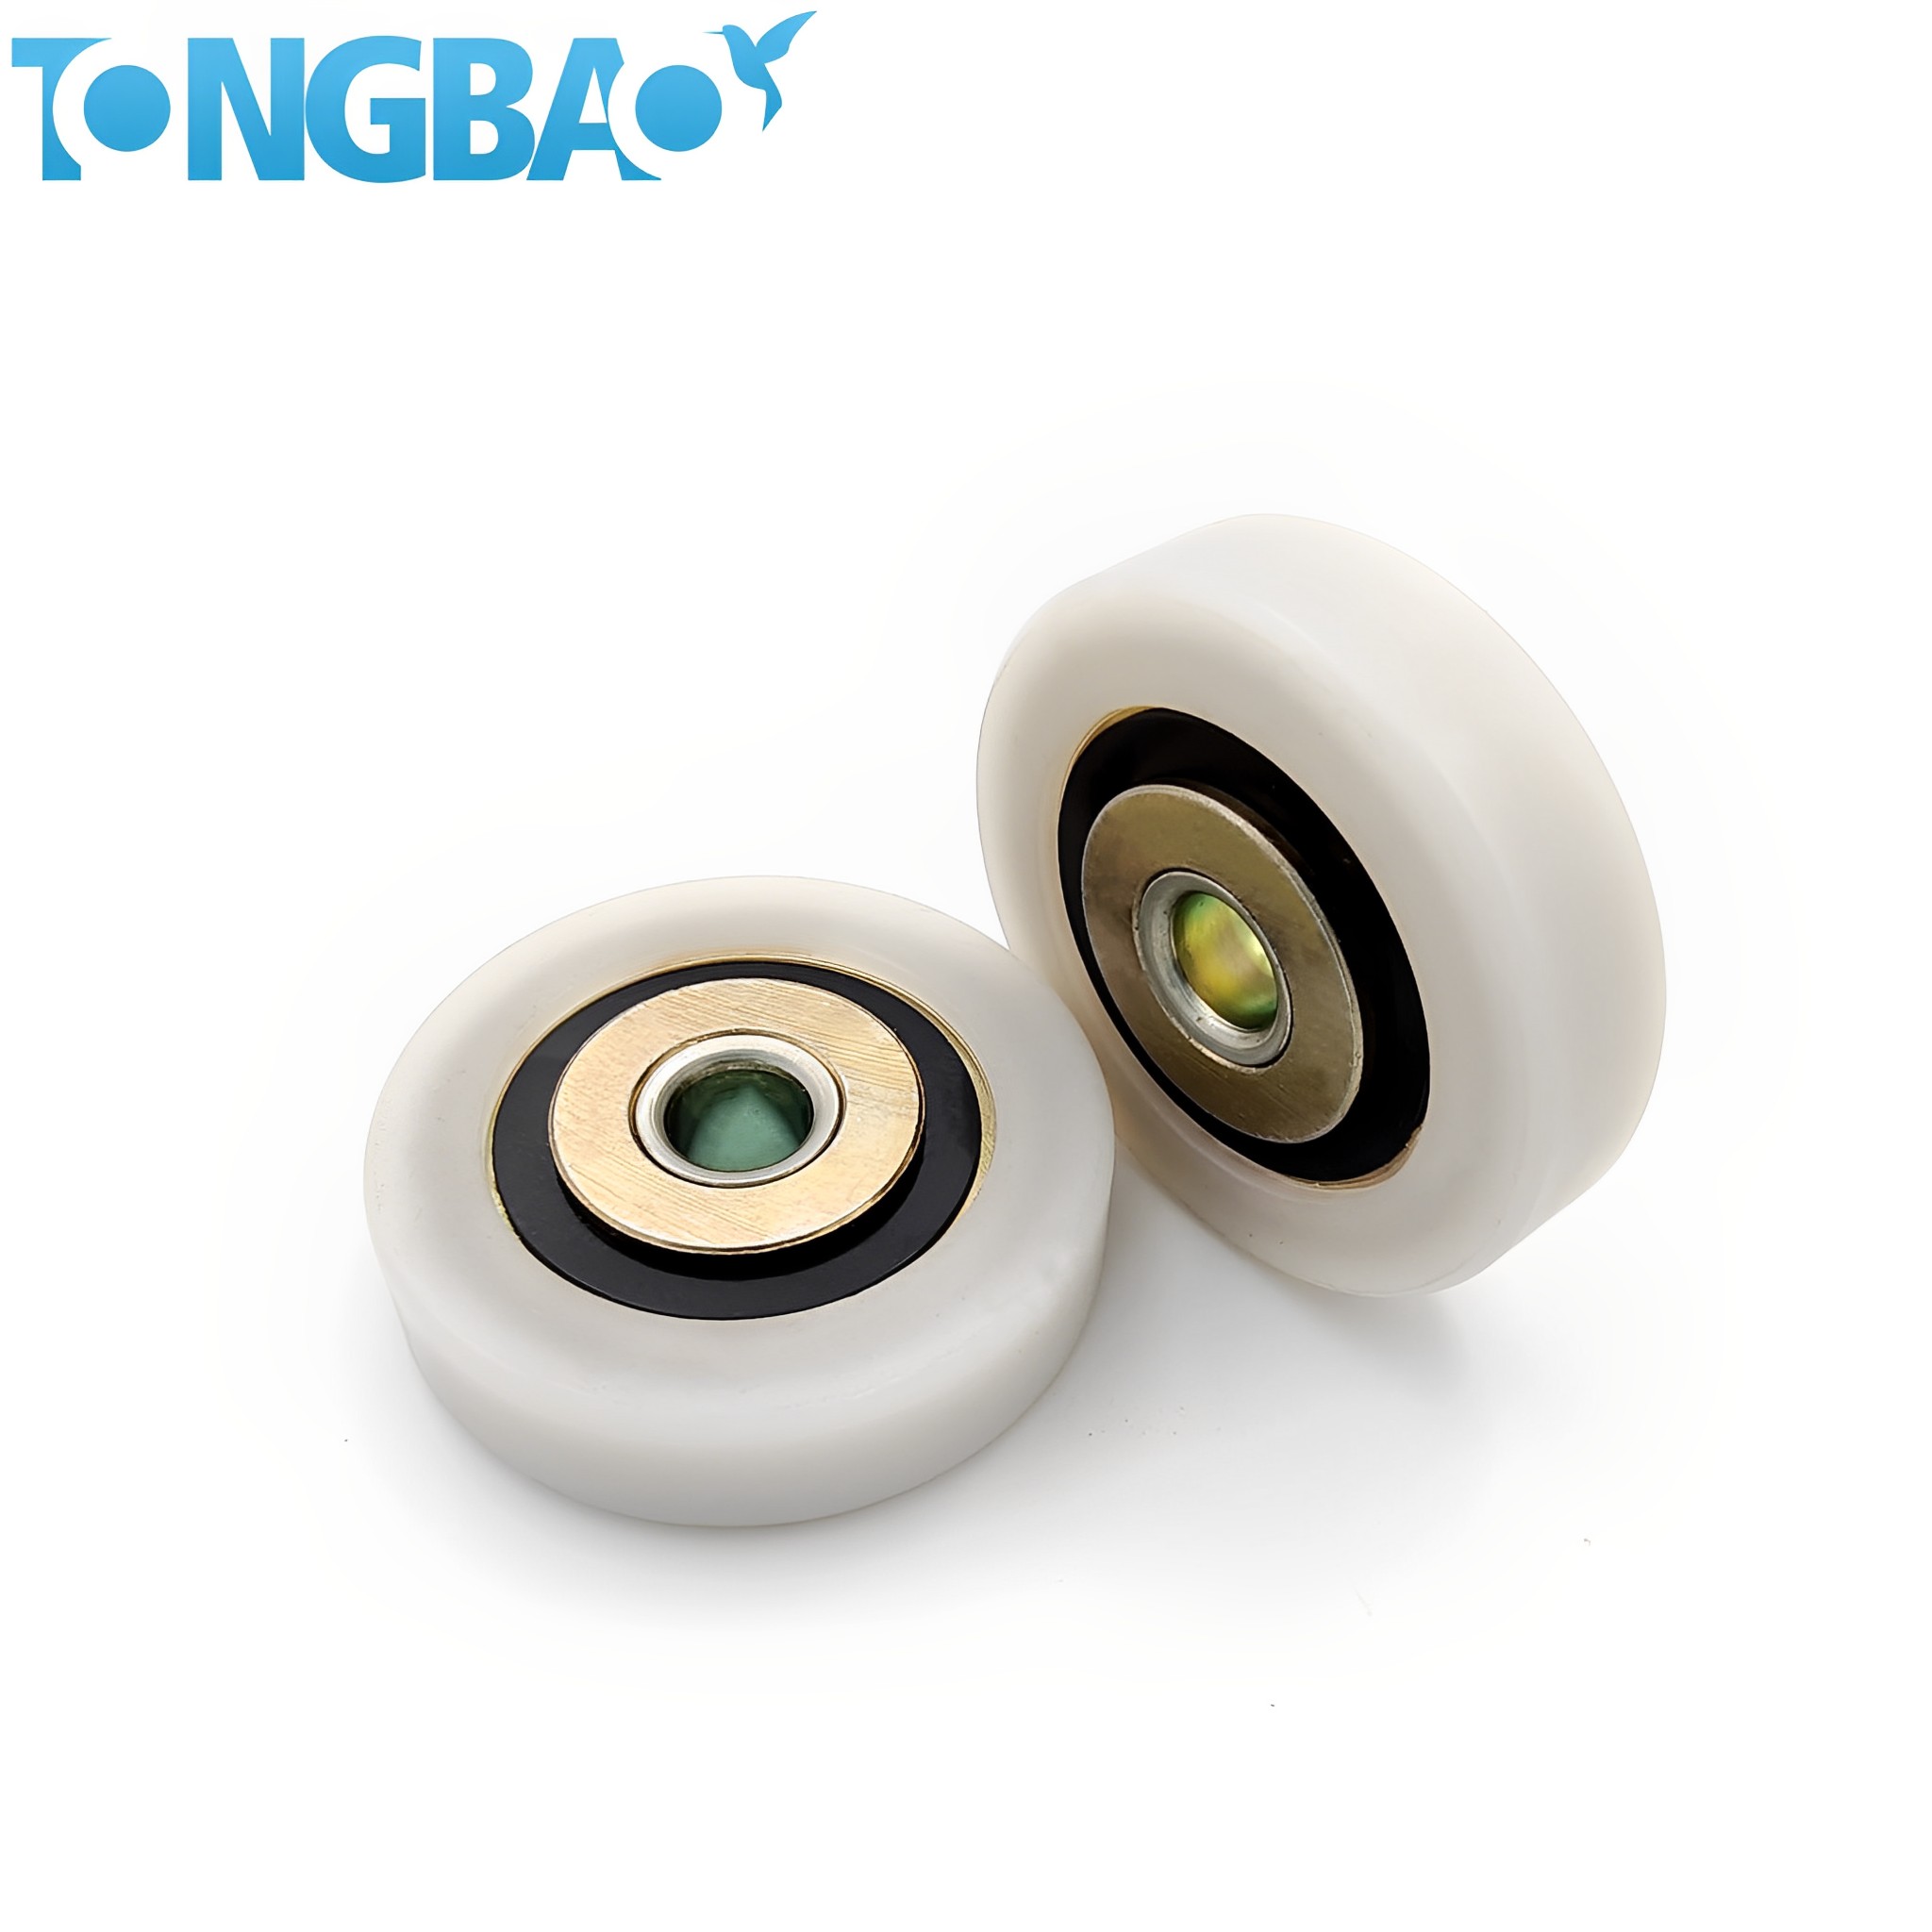 Yellow Zinc Plated Plastic Wheel Bearing for Supporting The Guide Rail of The Track of Dry Cleaning Shop Featured Image